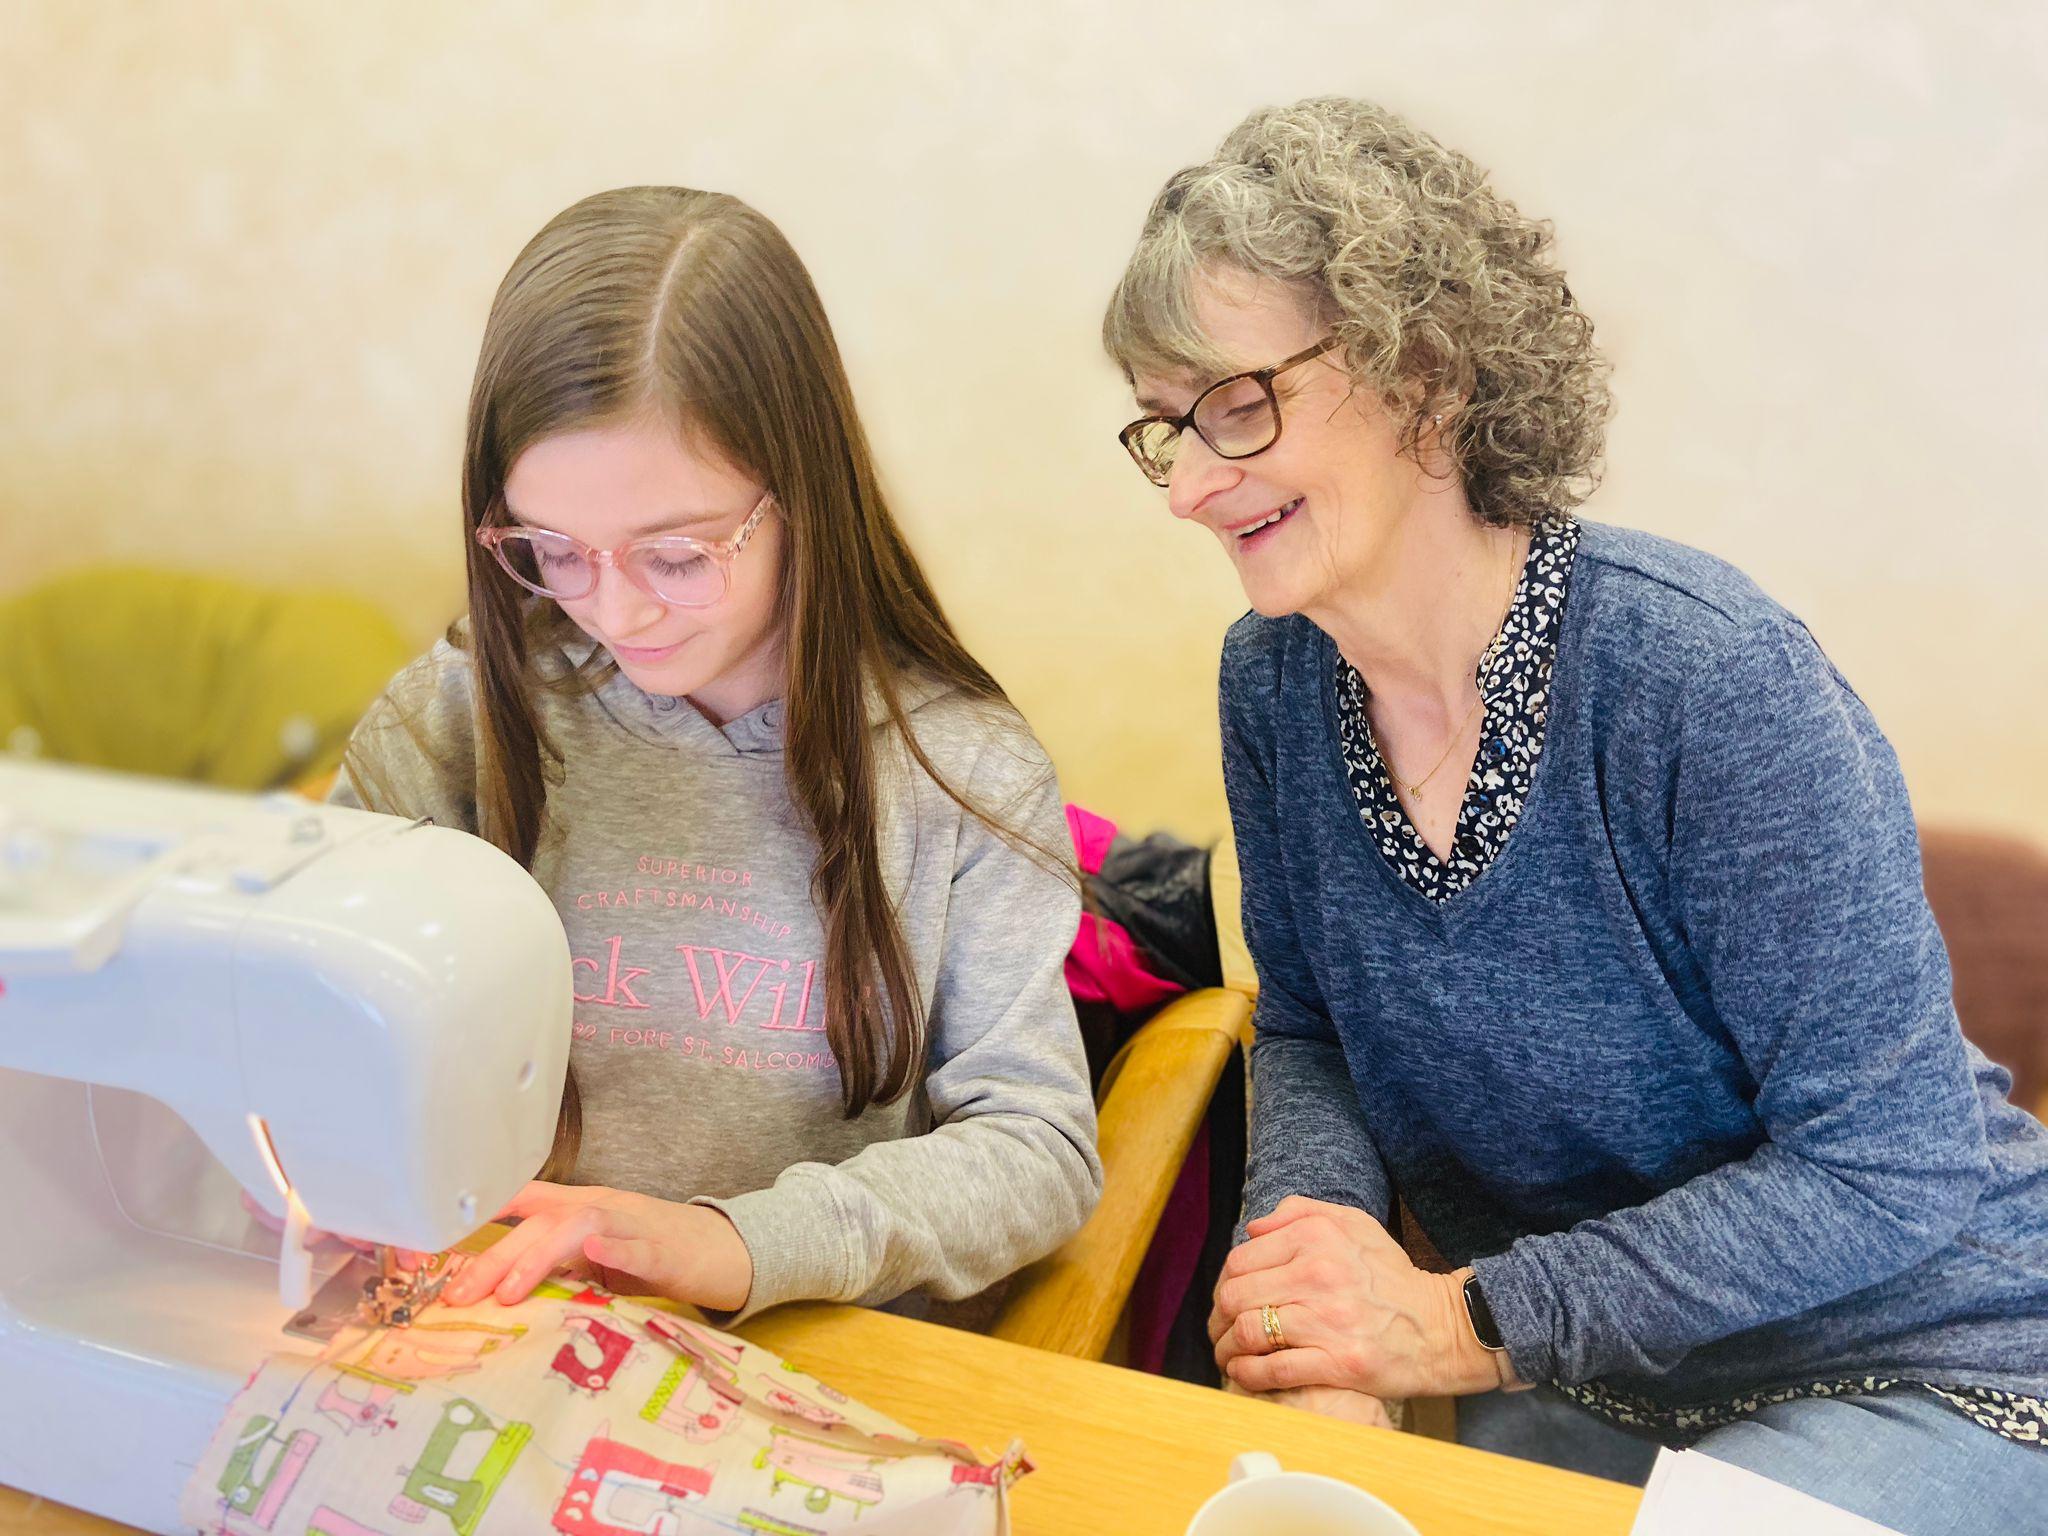 Intergenerational sewing lessons at Stitching Time